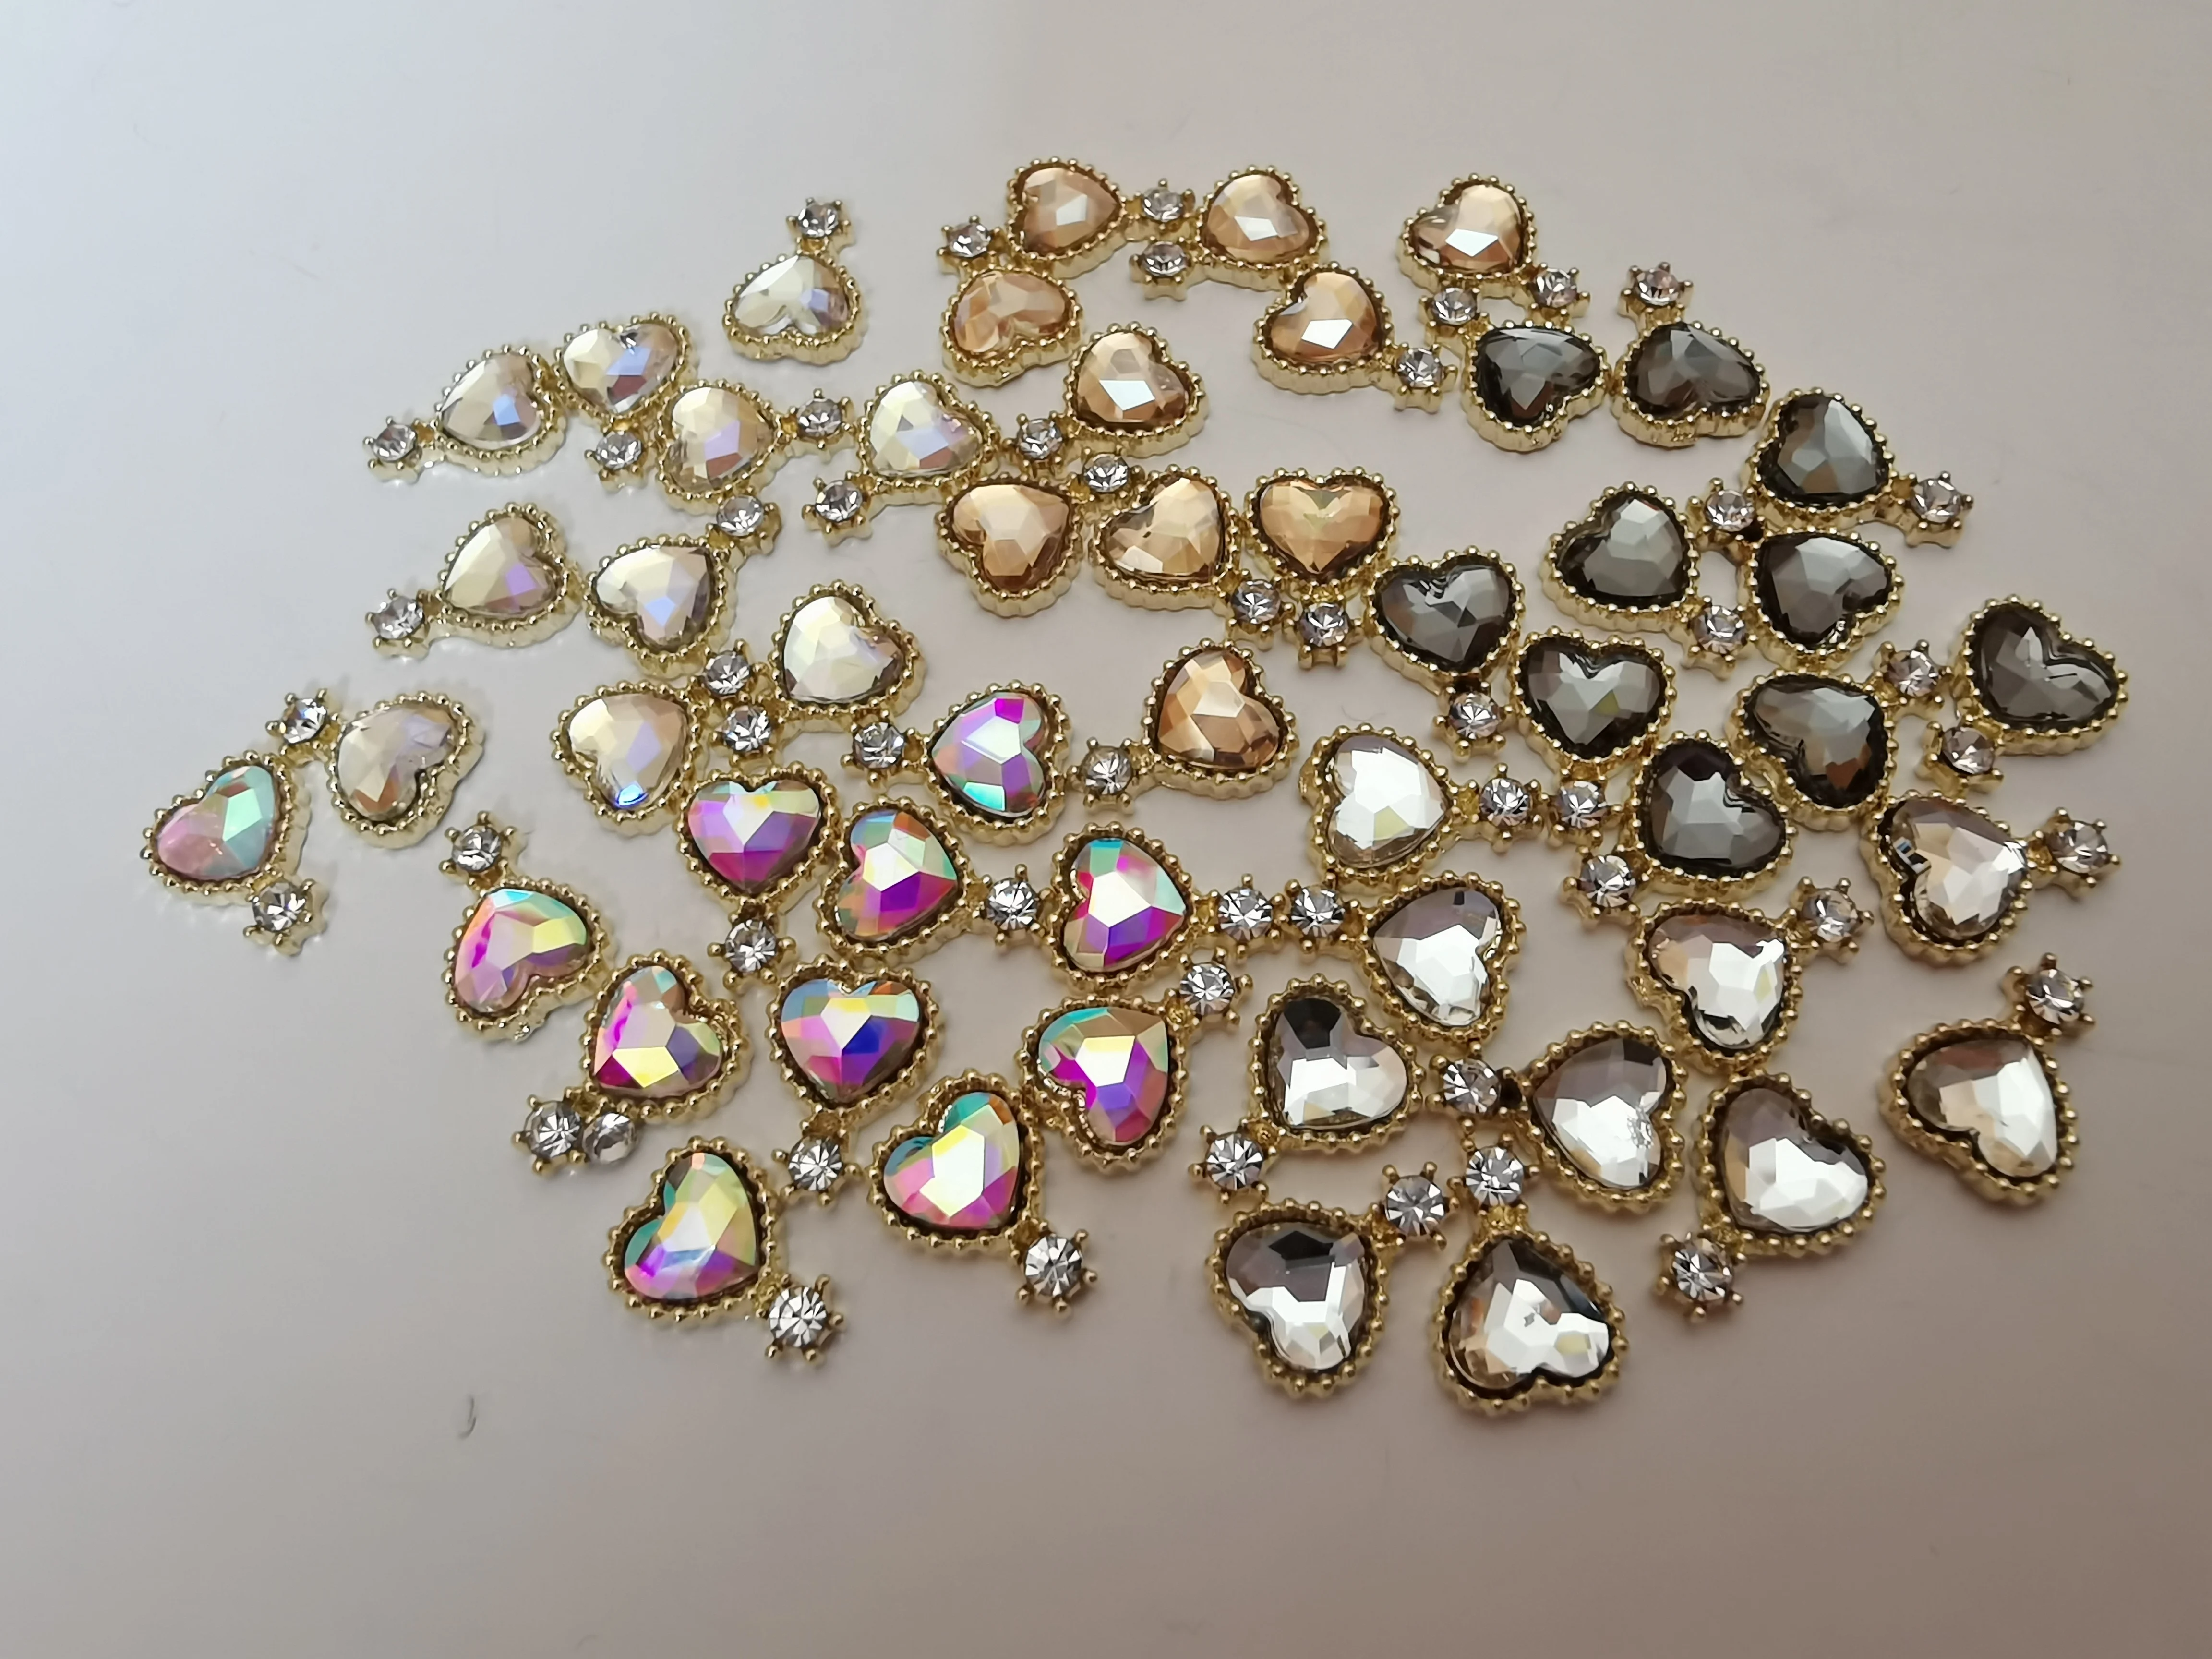 100pc AB Crystal Heart Shape Nail Charm Alloy Rhinestone FOR Nails Design MANICURE Supply Fairy Love Nail Art Luxury Decorations enlarge